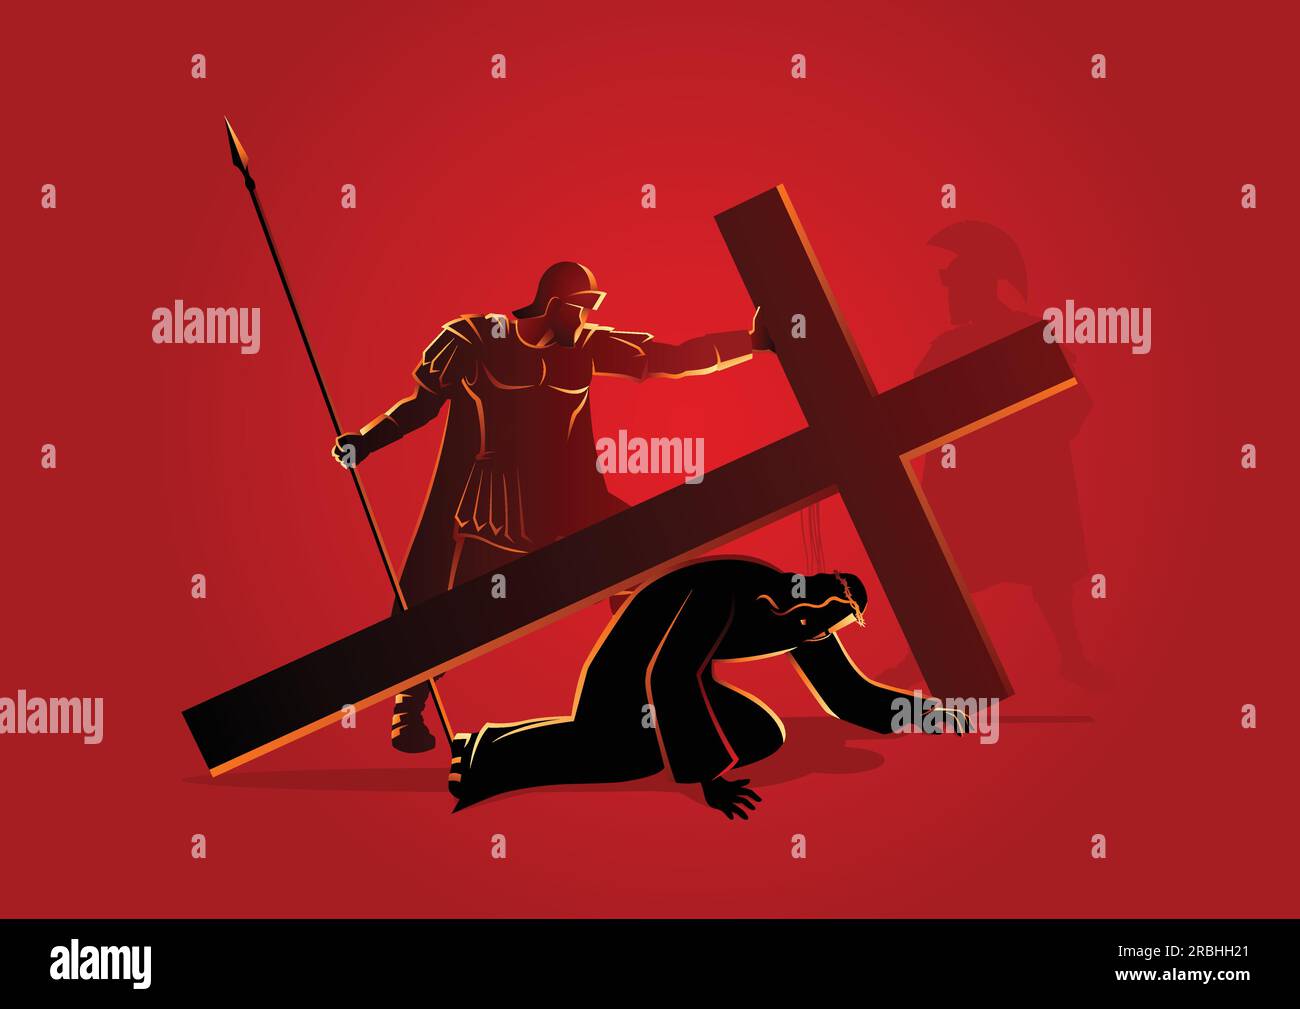 Biblical vector illustration series. Way of the Cross or Stations of the Cross, seventh station, Jesus falls for the second time. Stock Vector